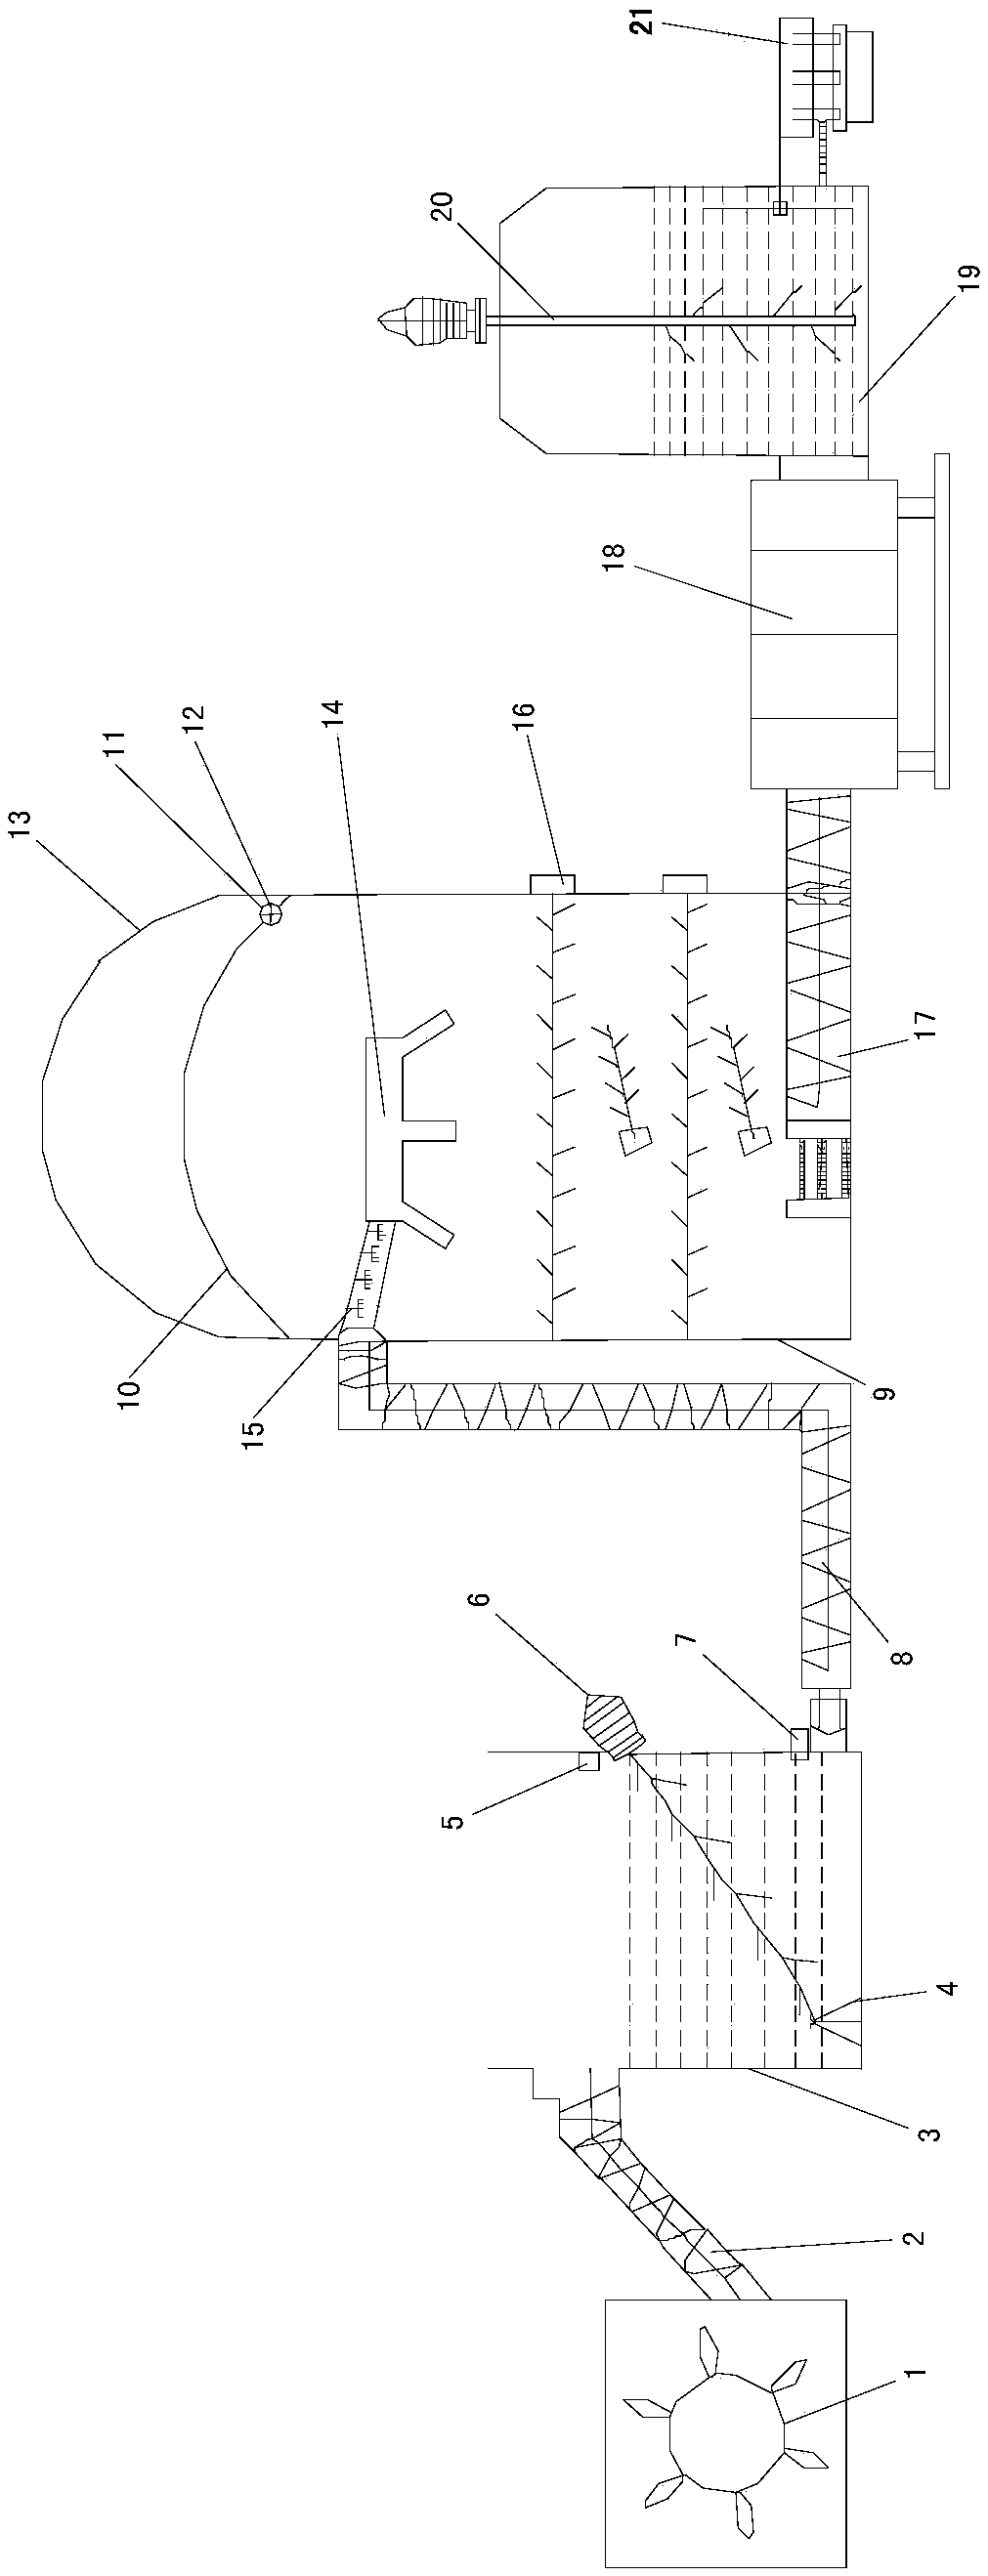 Production method and system for preparing seedling culture tray from straw